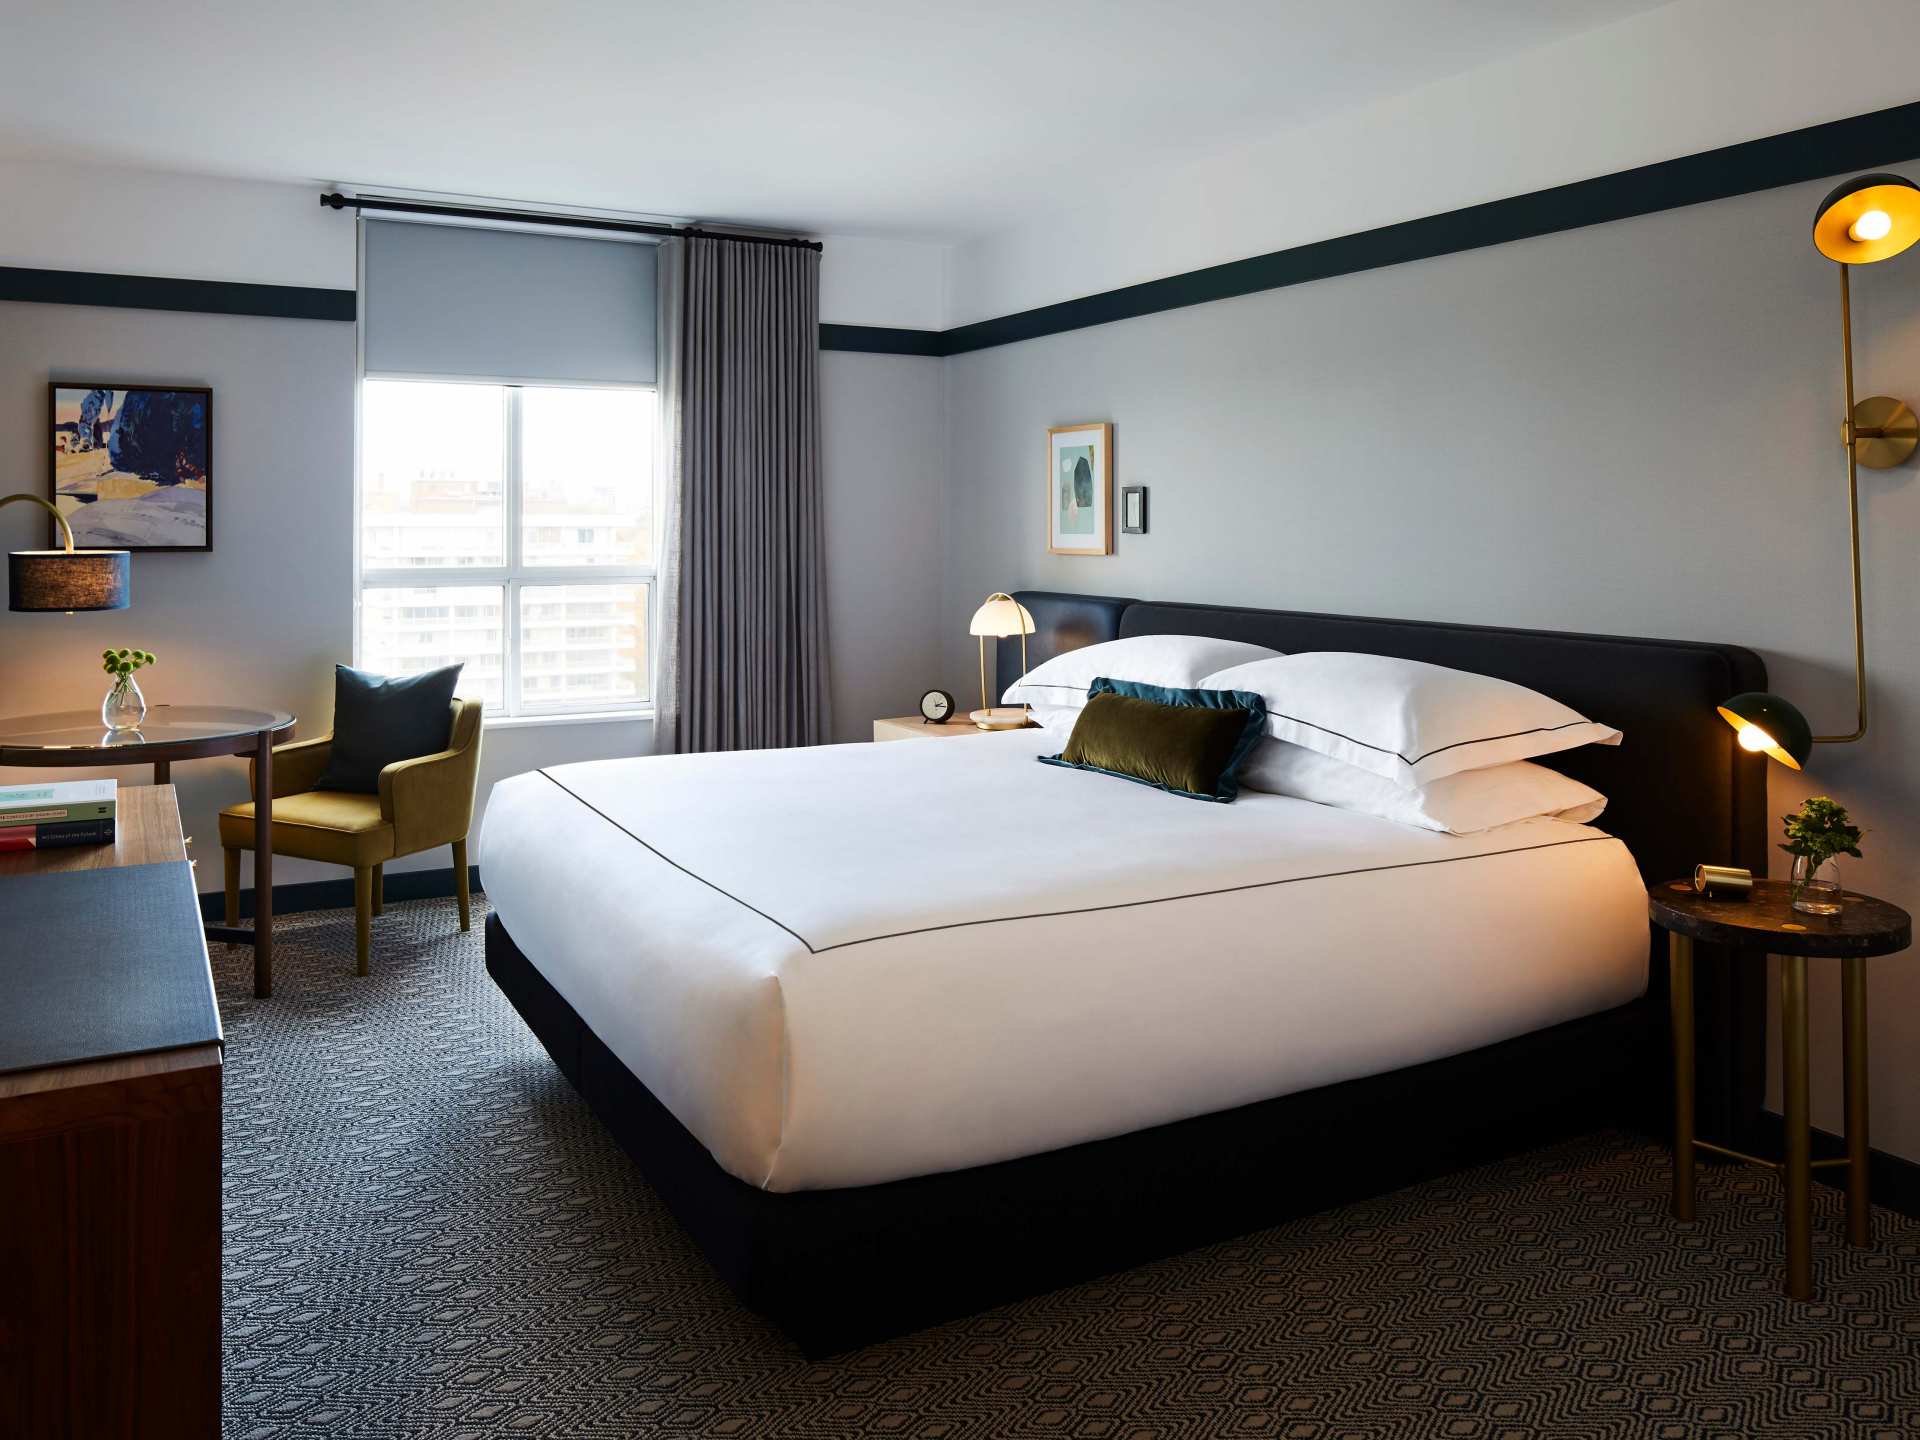 A suite at the Kimpton Saint George hotel with a king-sized bed